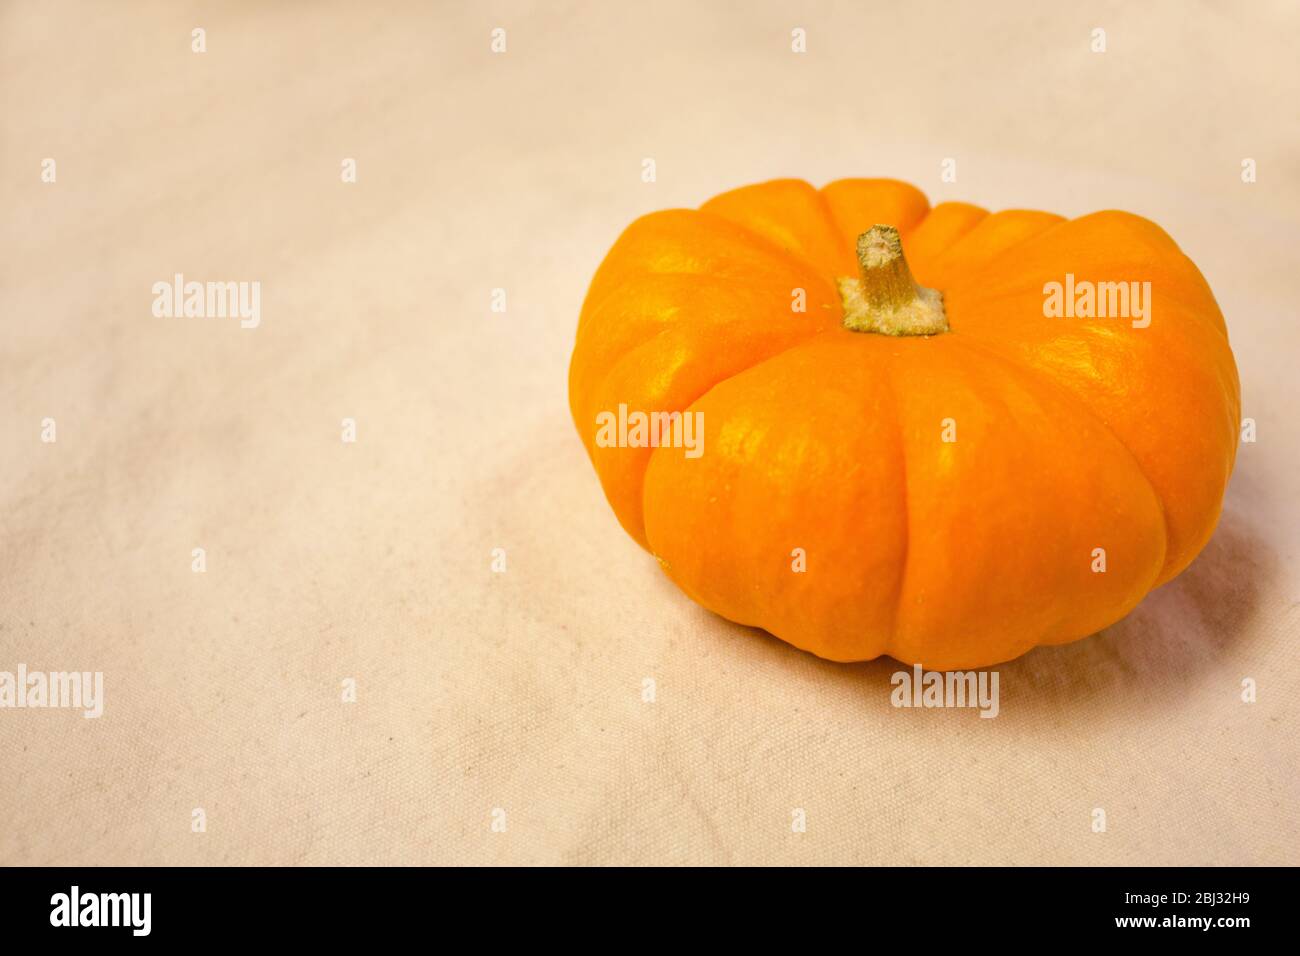 Pumpkins on fabric canvas a sacking Stock Photo